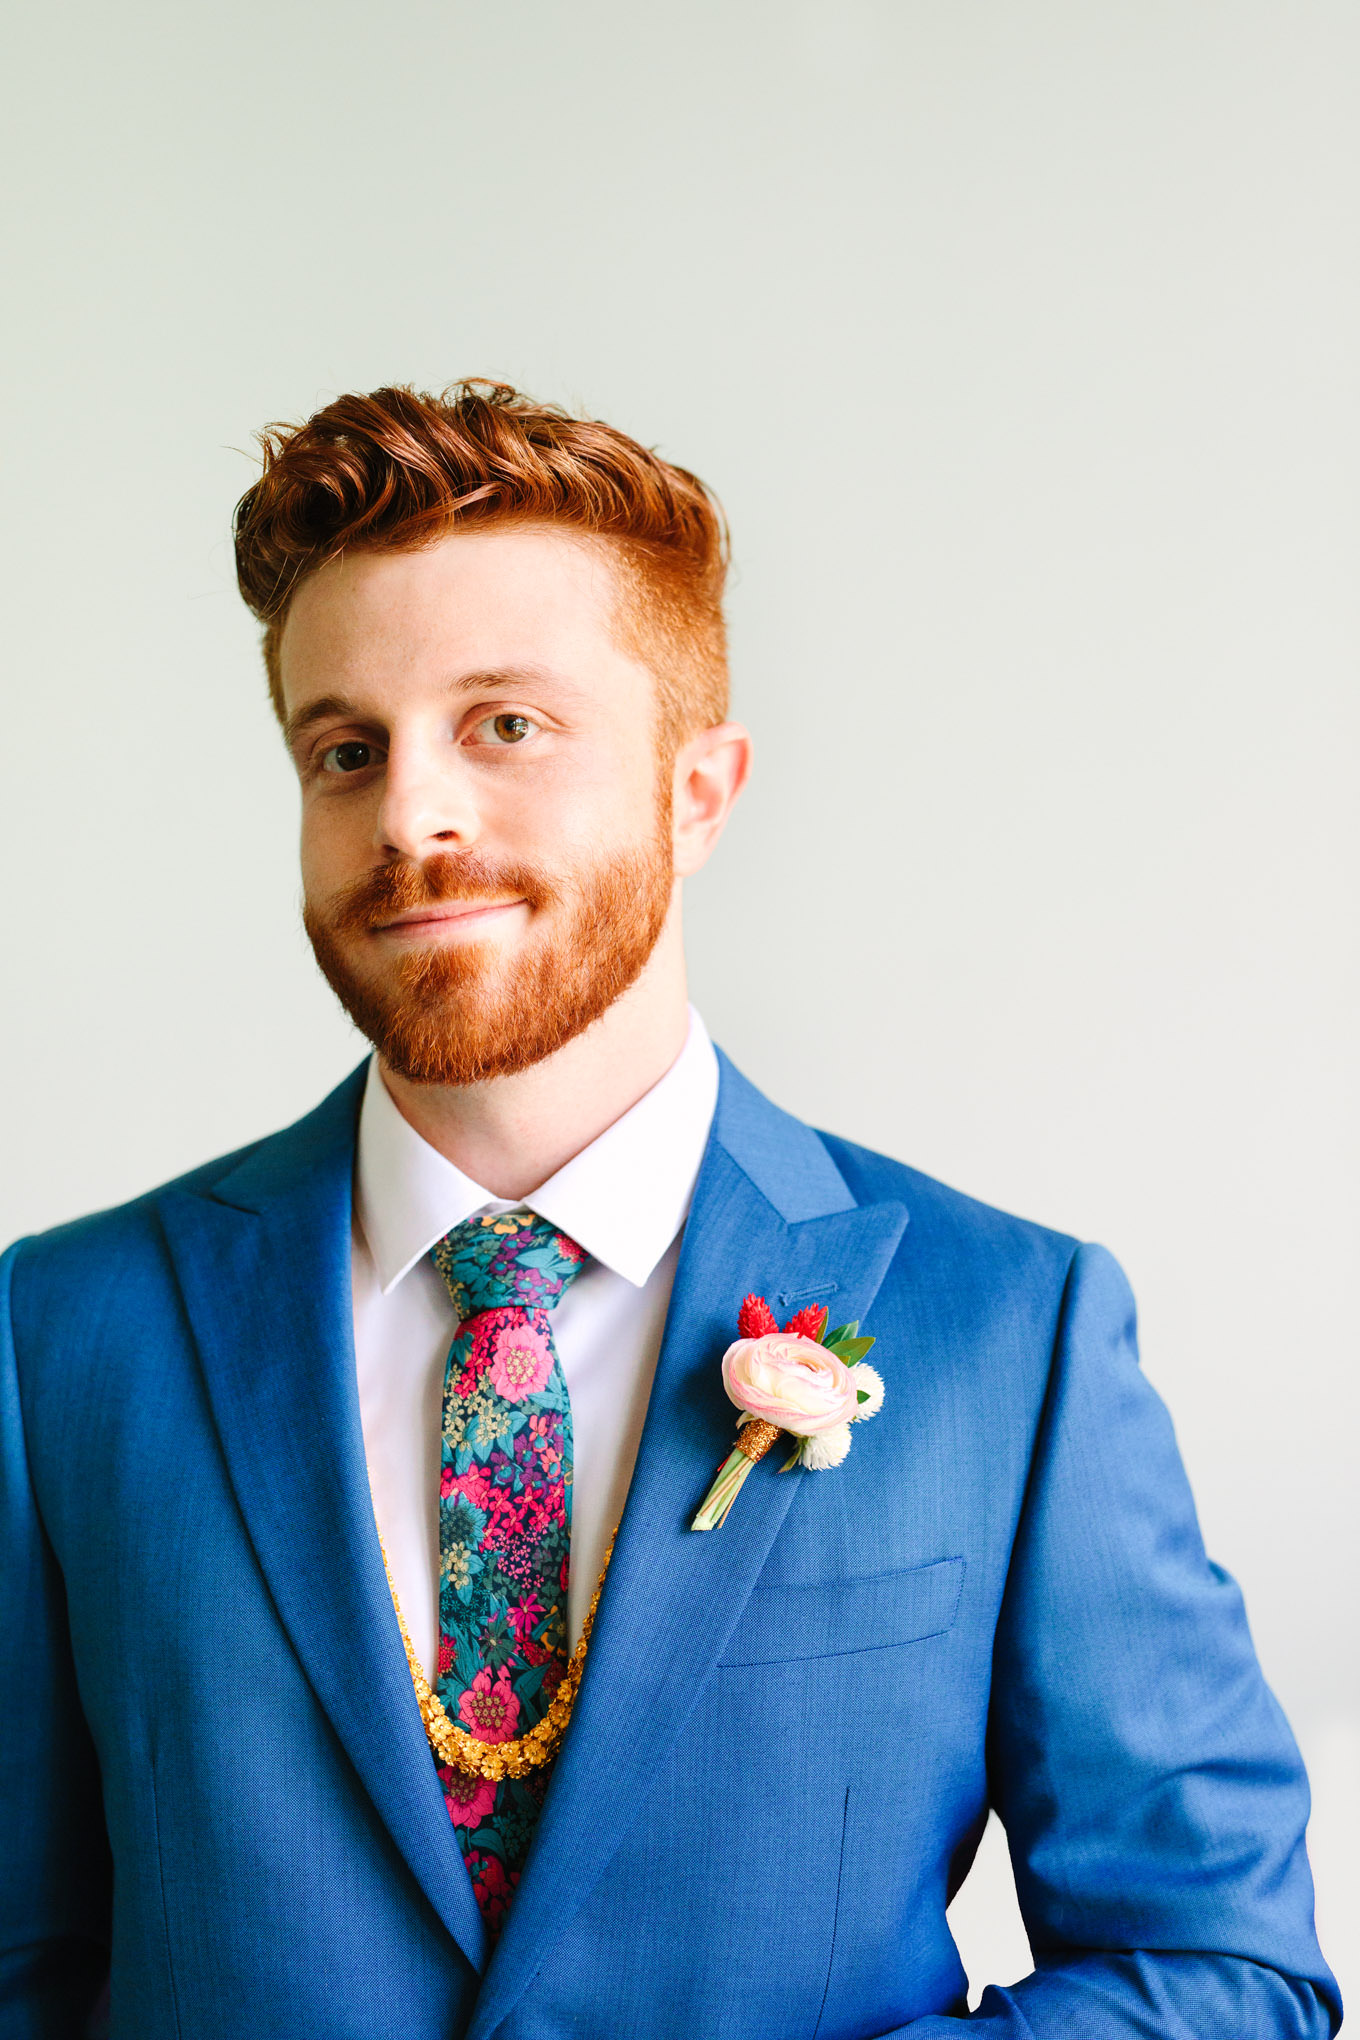 Groom with red hair in bright blue suit with OTAA tie. Two Disney artists create a unique and colorful Indian Fusion wedding at The Fig House Los Angeles, featured on Green Wedding Shoes. | Colorful and elevated wedding inspiration for fun-loving couples in Southern California | #indianwedding #indianfusionwedding #thefighouse #losangeleswedding   Source: Mary Costa Photography | Los Angeles